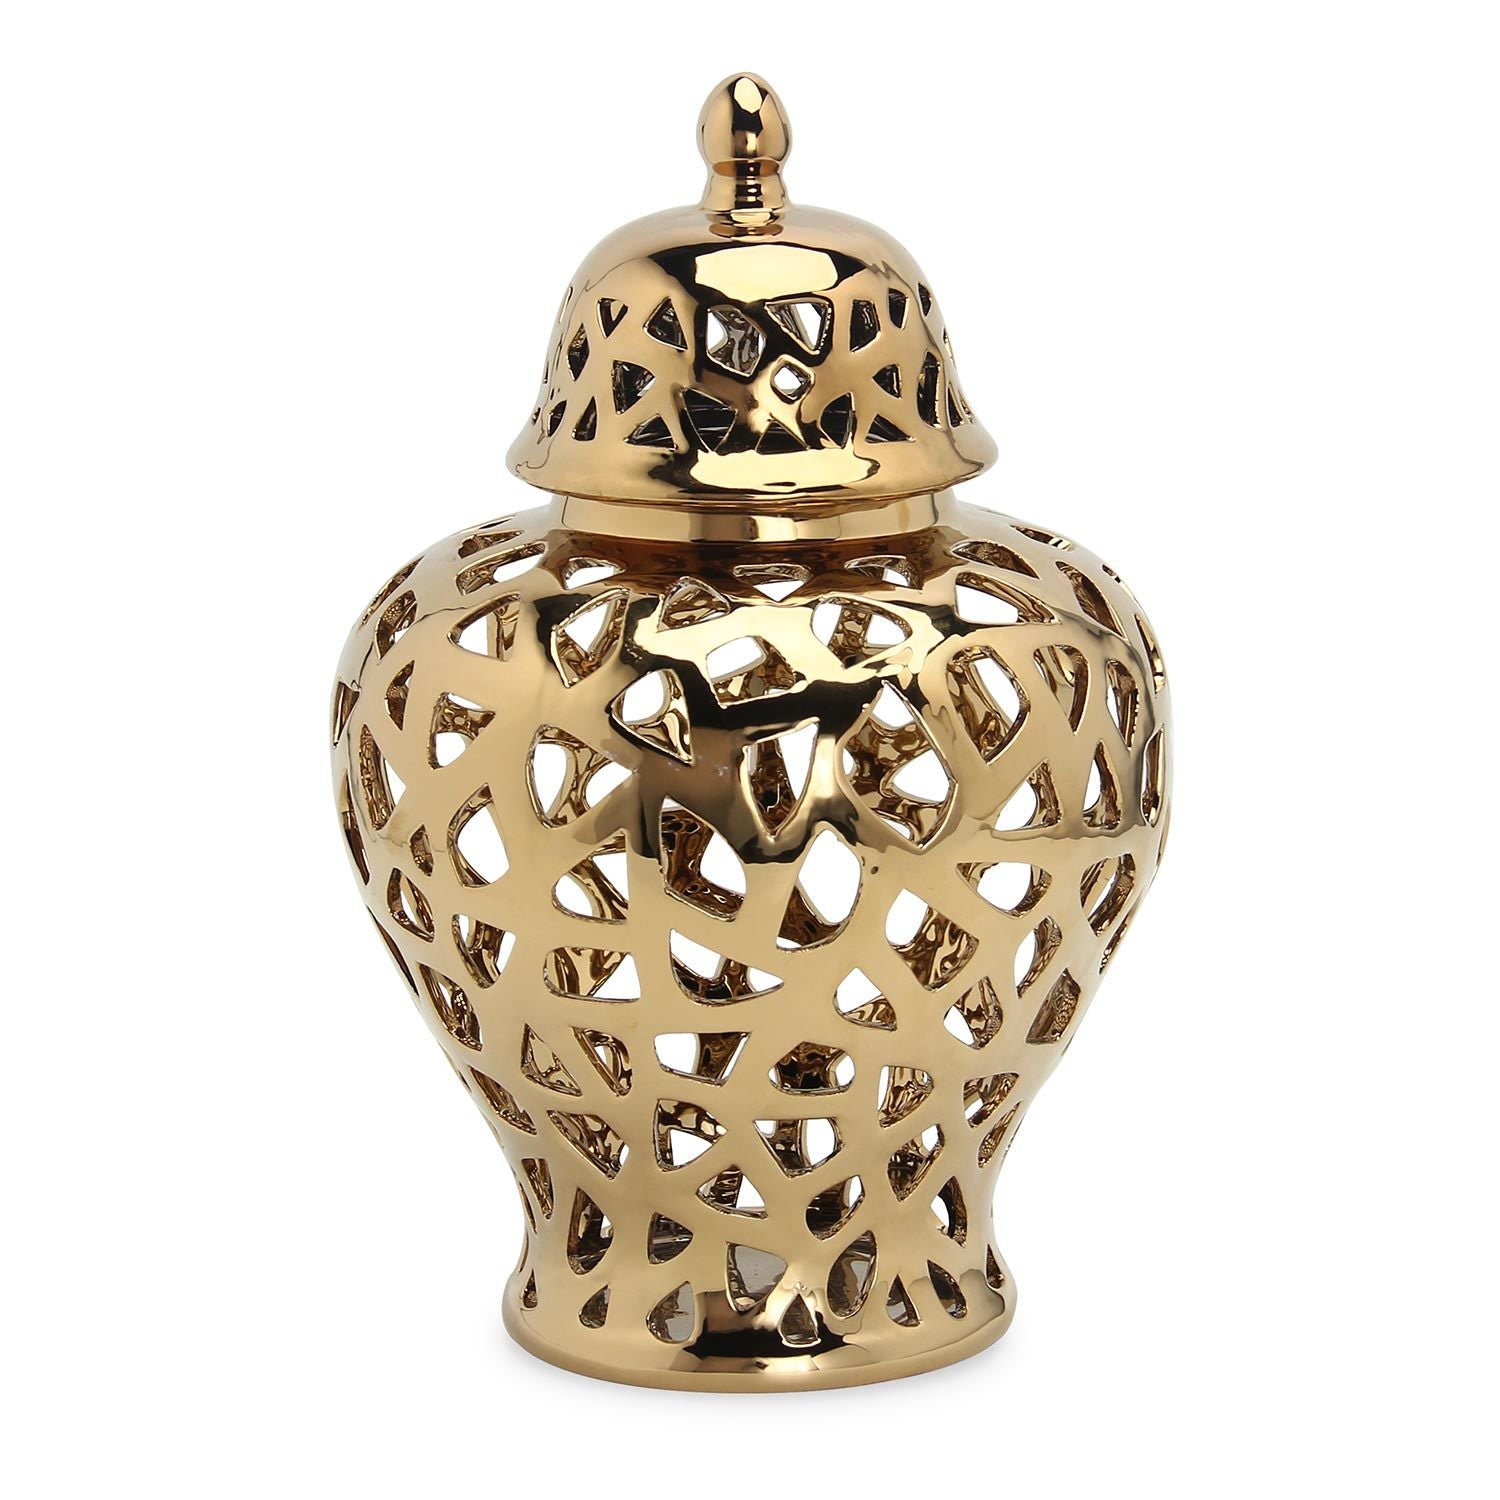 A golden, intricately pierced Gold Ceramic Ginger Jar Vase with Decorative Design with a removable lid, isolated on a white background, perfect for interior design.